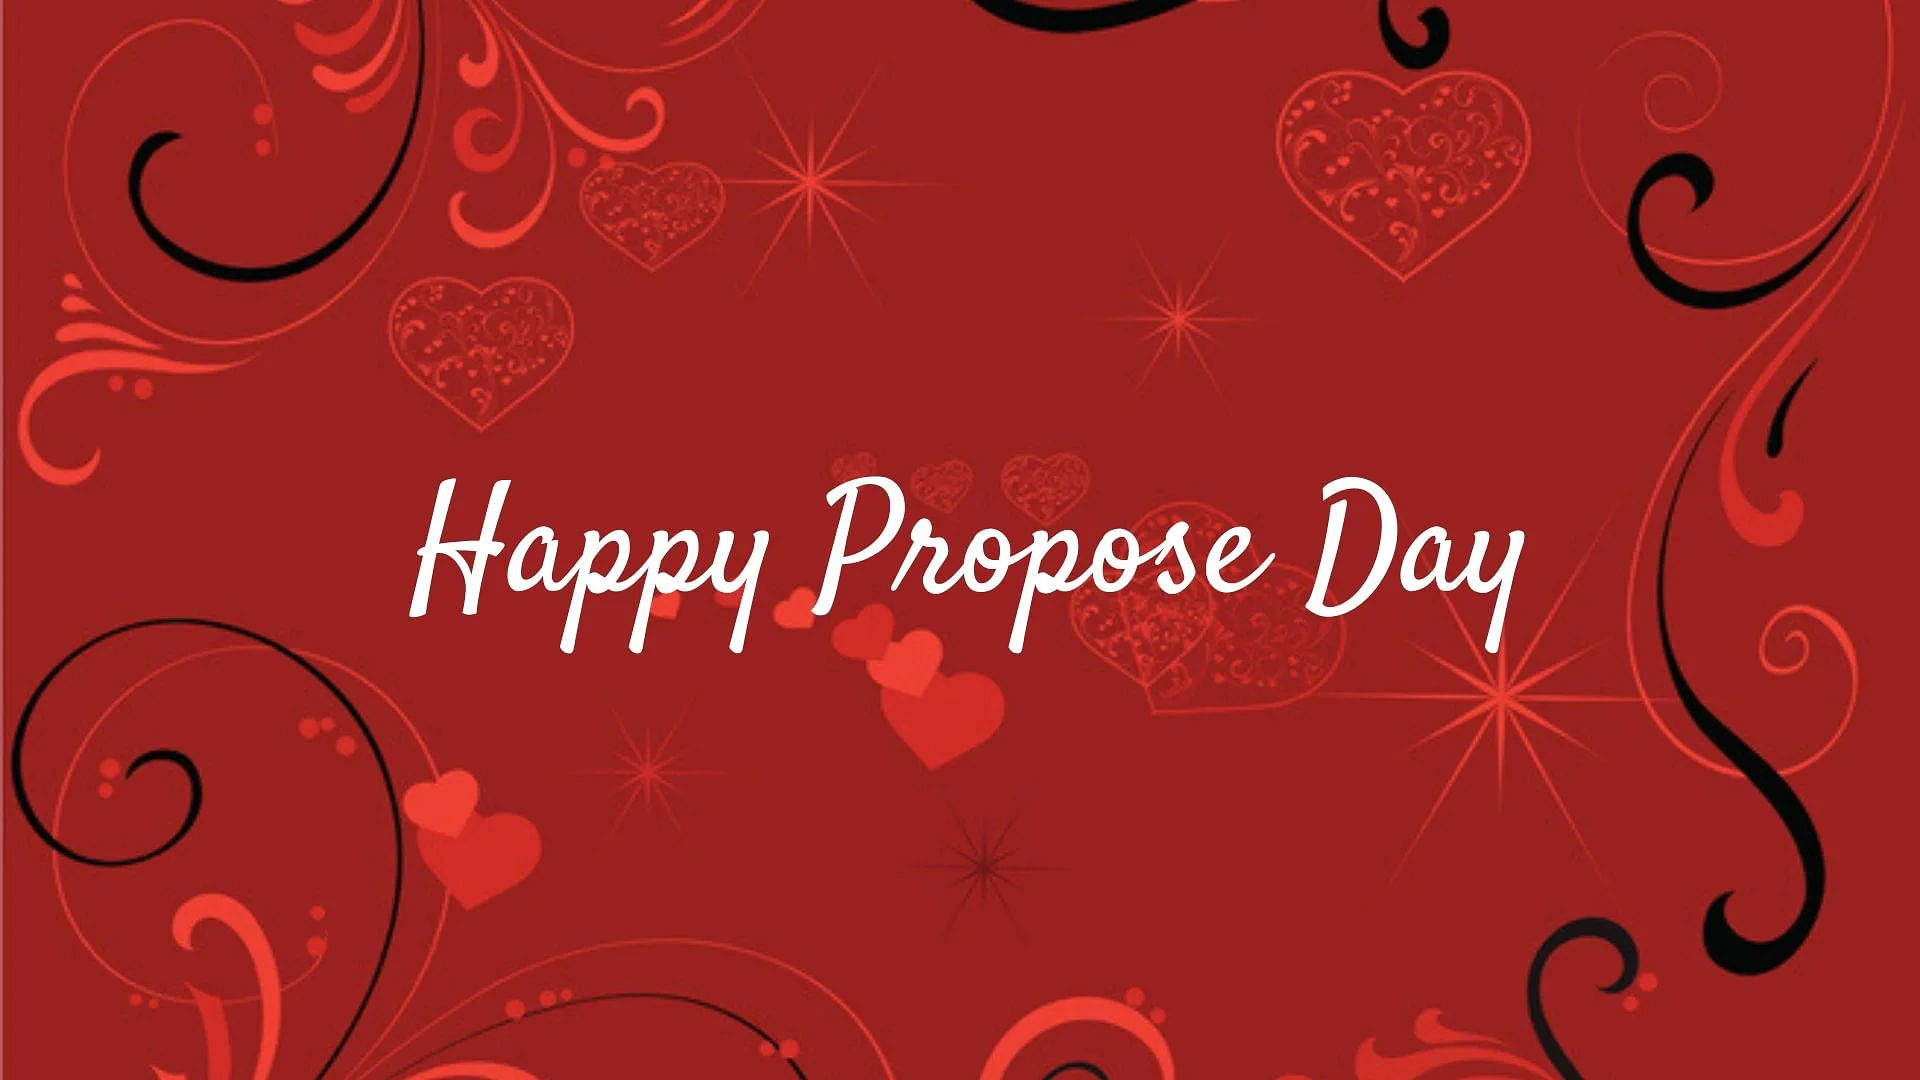 Happy Propose Day wishes, quotes and images in English and Hindi.